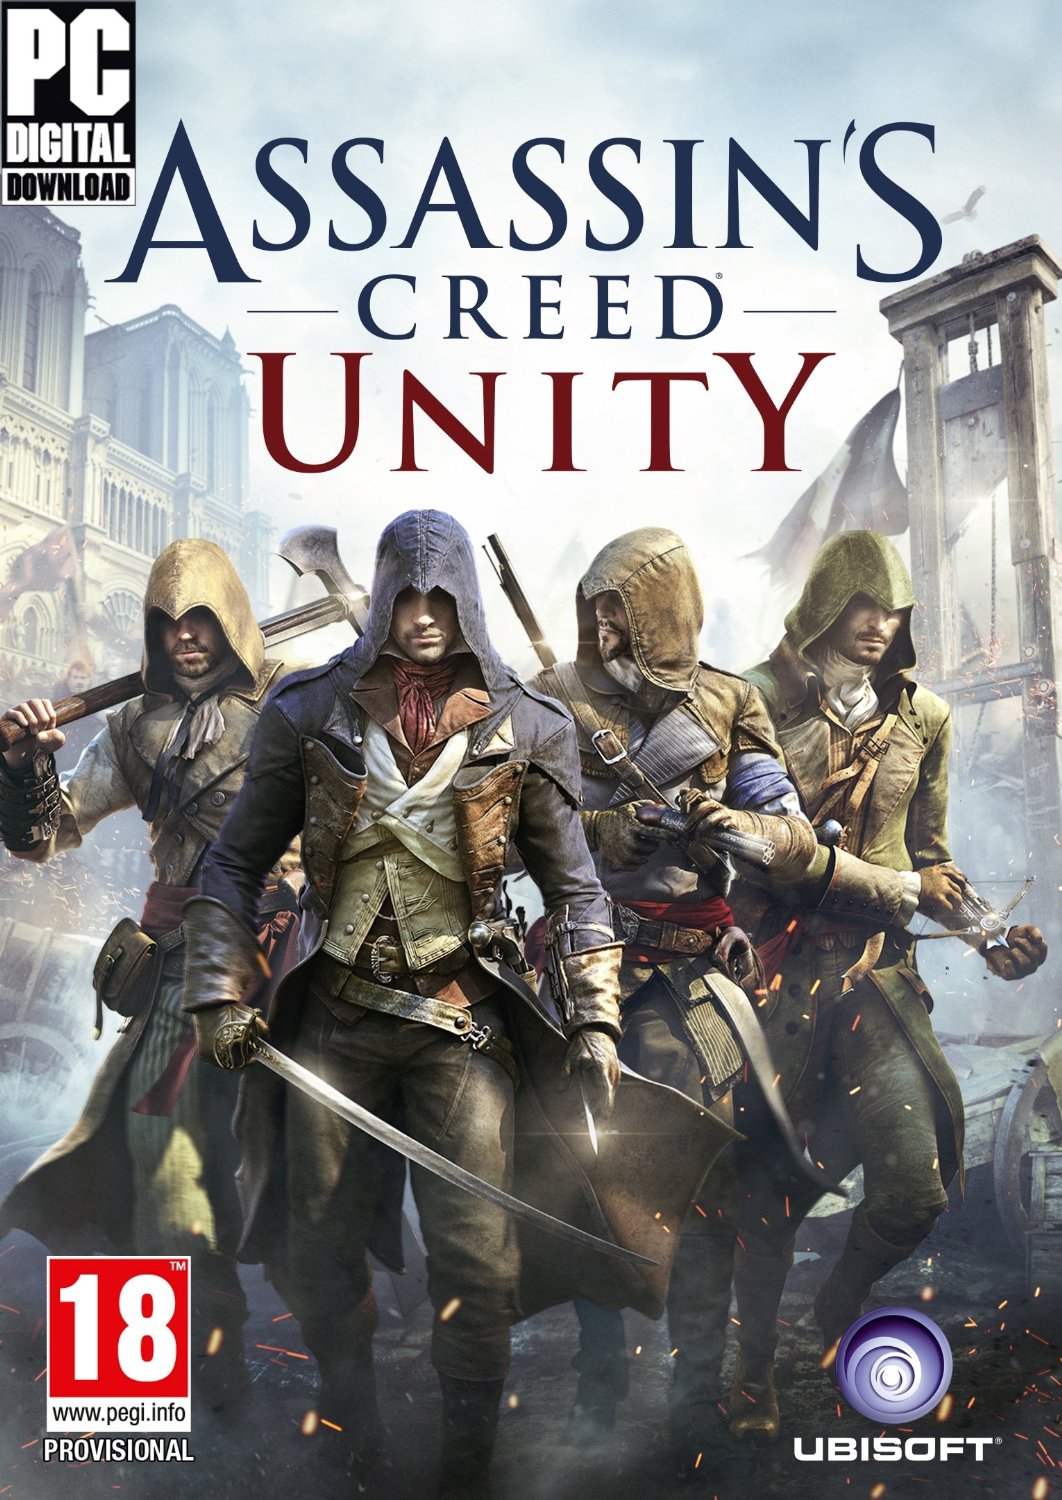 https://rozup.ir/up/narsis3/Pictures/Assassins-Creed-Unity-pc-cover-large.jpg